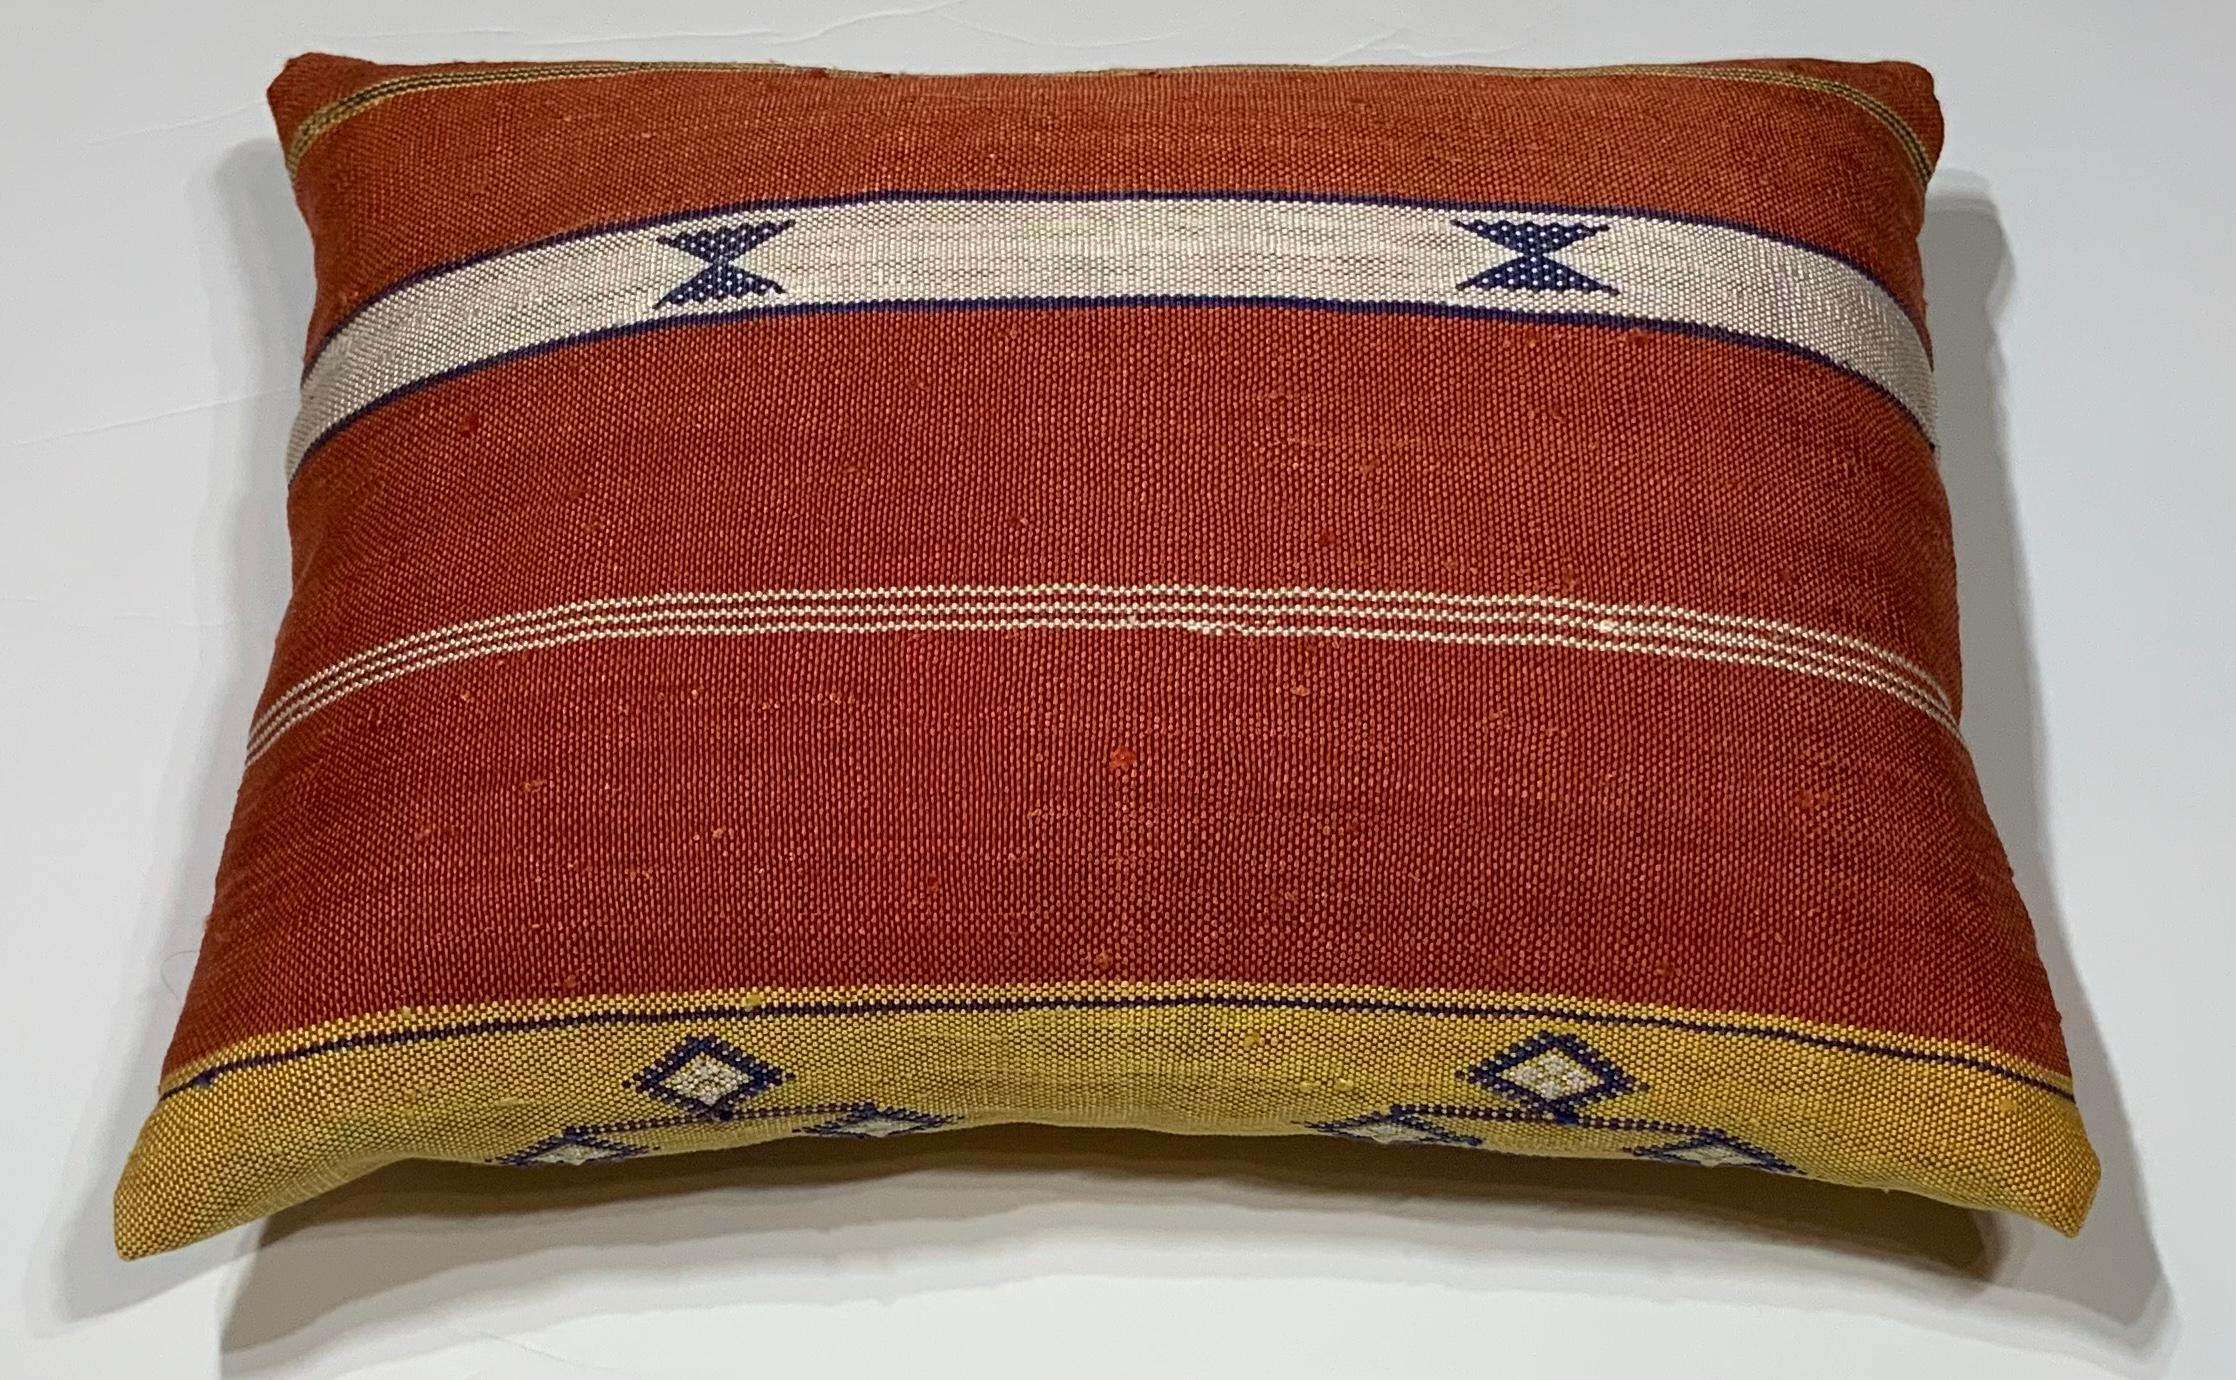 Beautiful pillow made of handwoven flat-weave textile on both side, with multi colors geometric motifs on a fresh new insert.